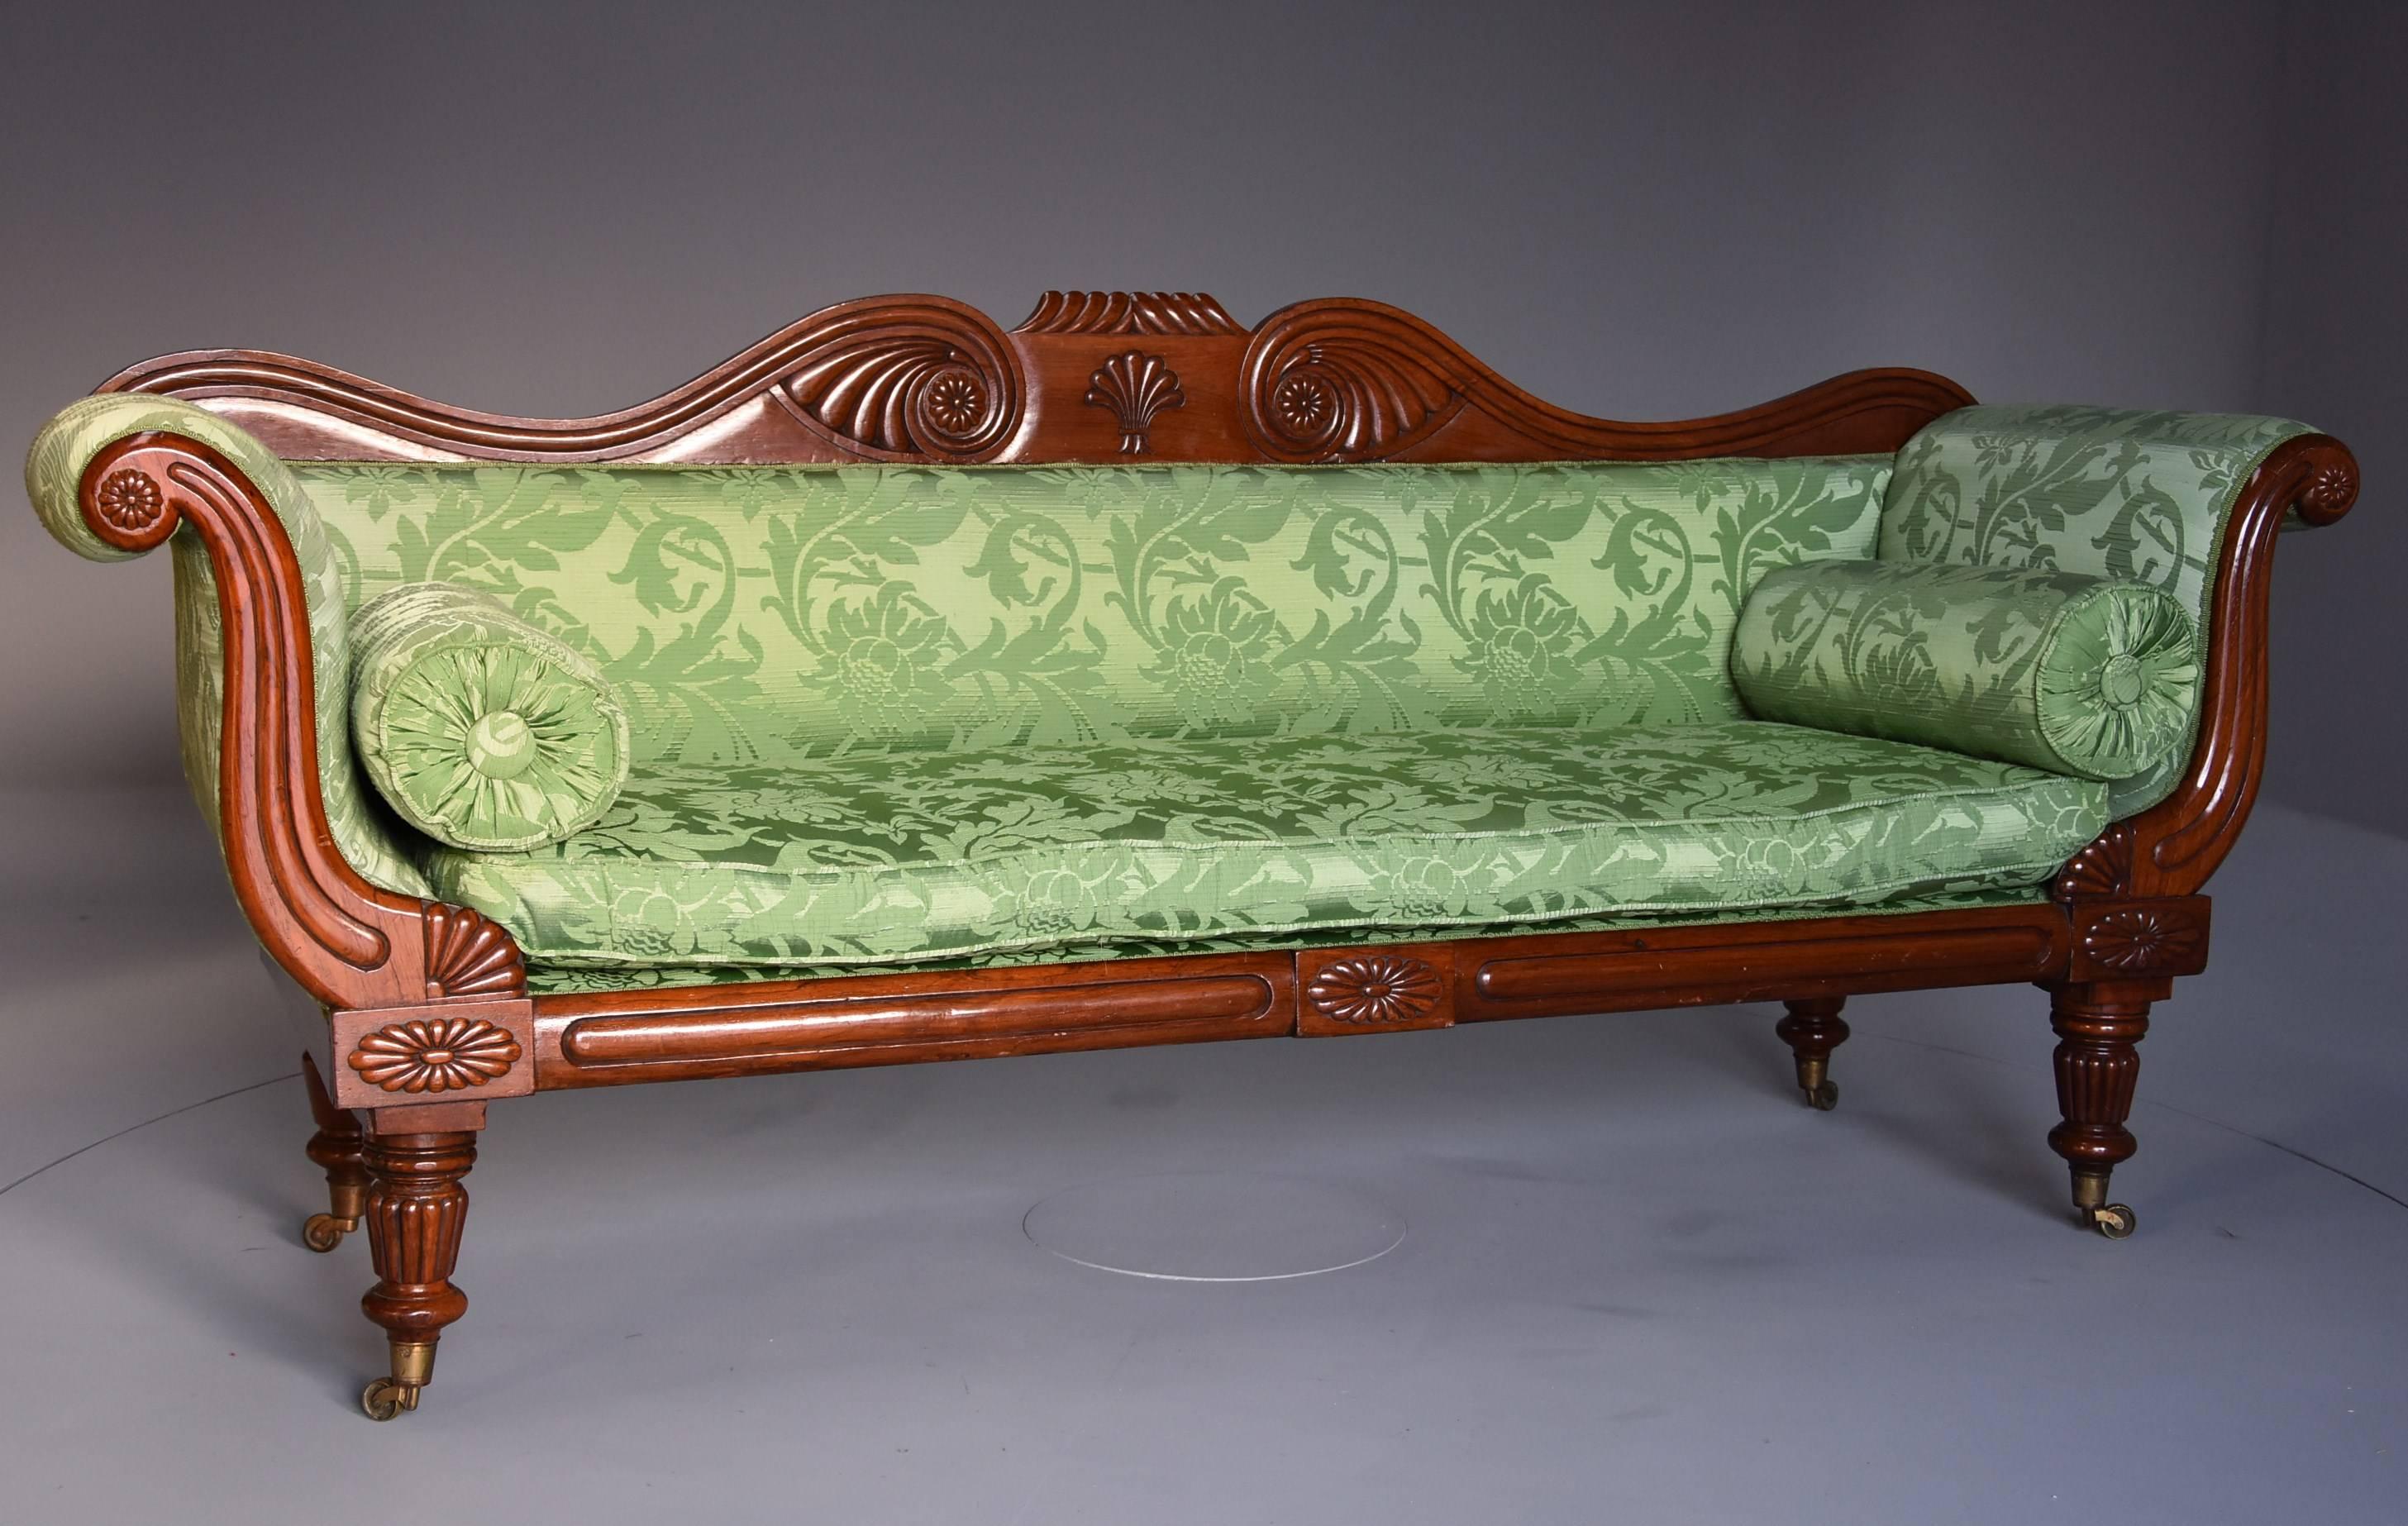 A late Regency scroll end mahogany sofa upholstered in green silk floral and foliate fabric.

This sofa consists of a shaped mahogany back with a central carved gadrooned design with carved shell decoration below with carved scrolling designs to